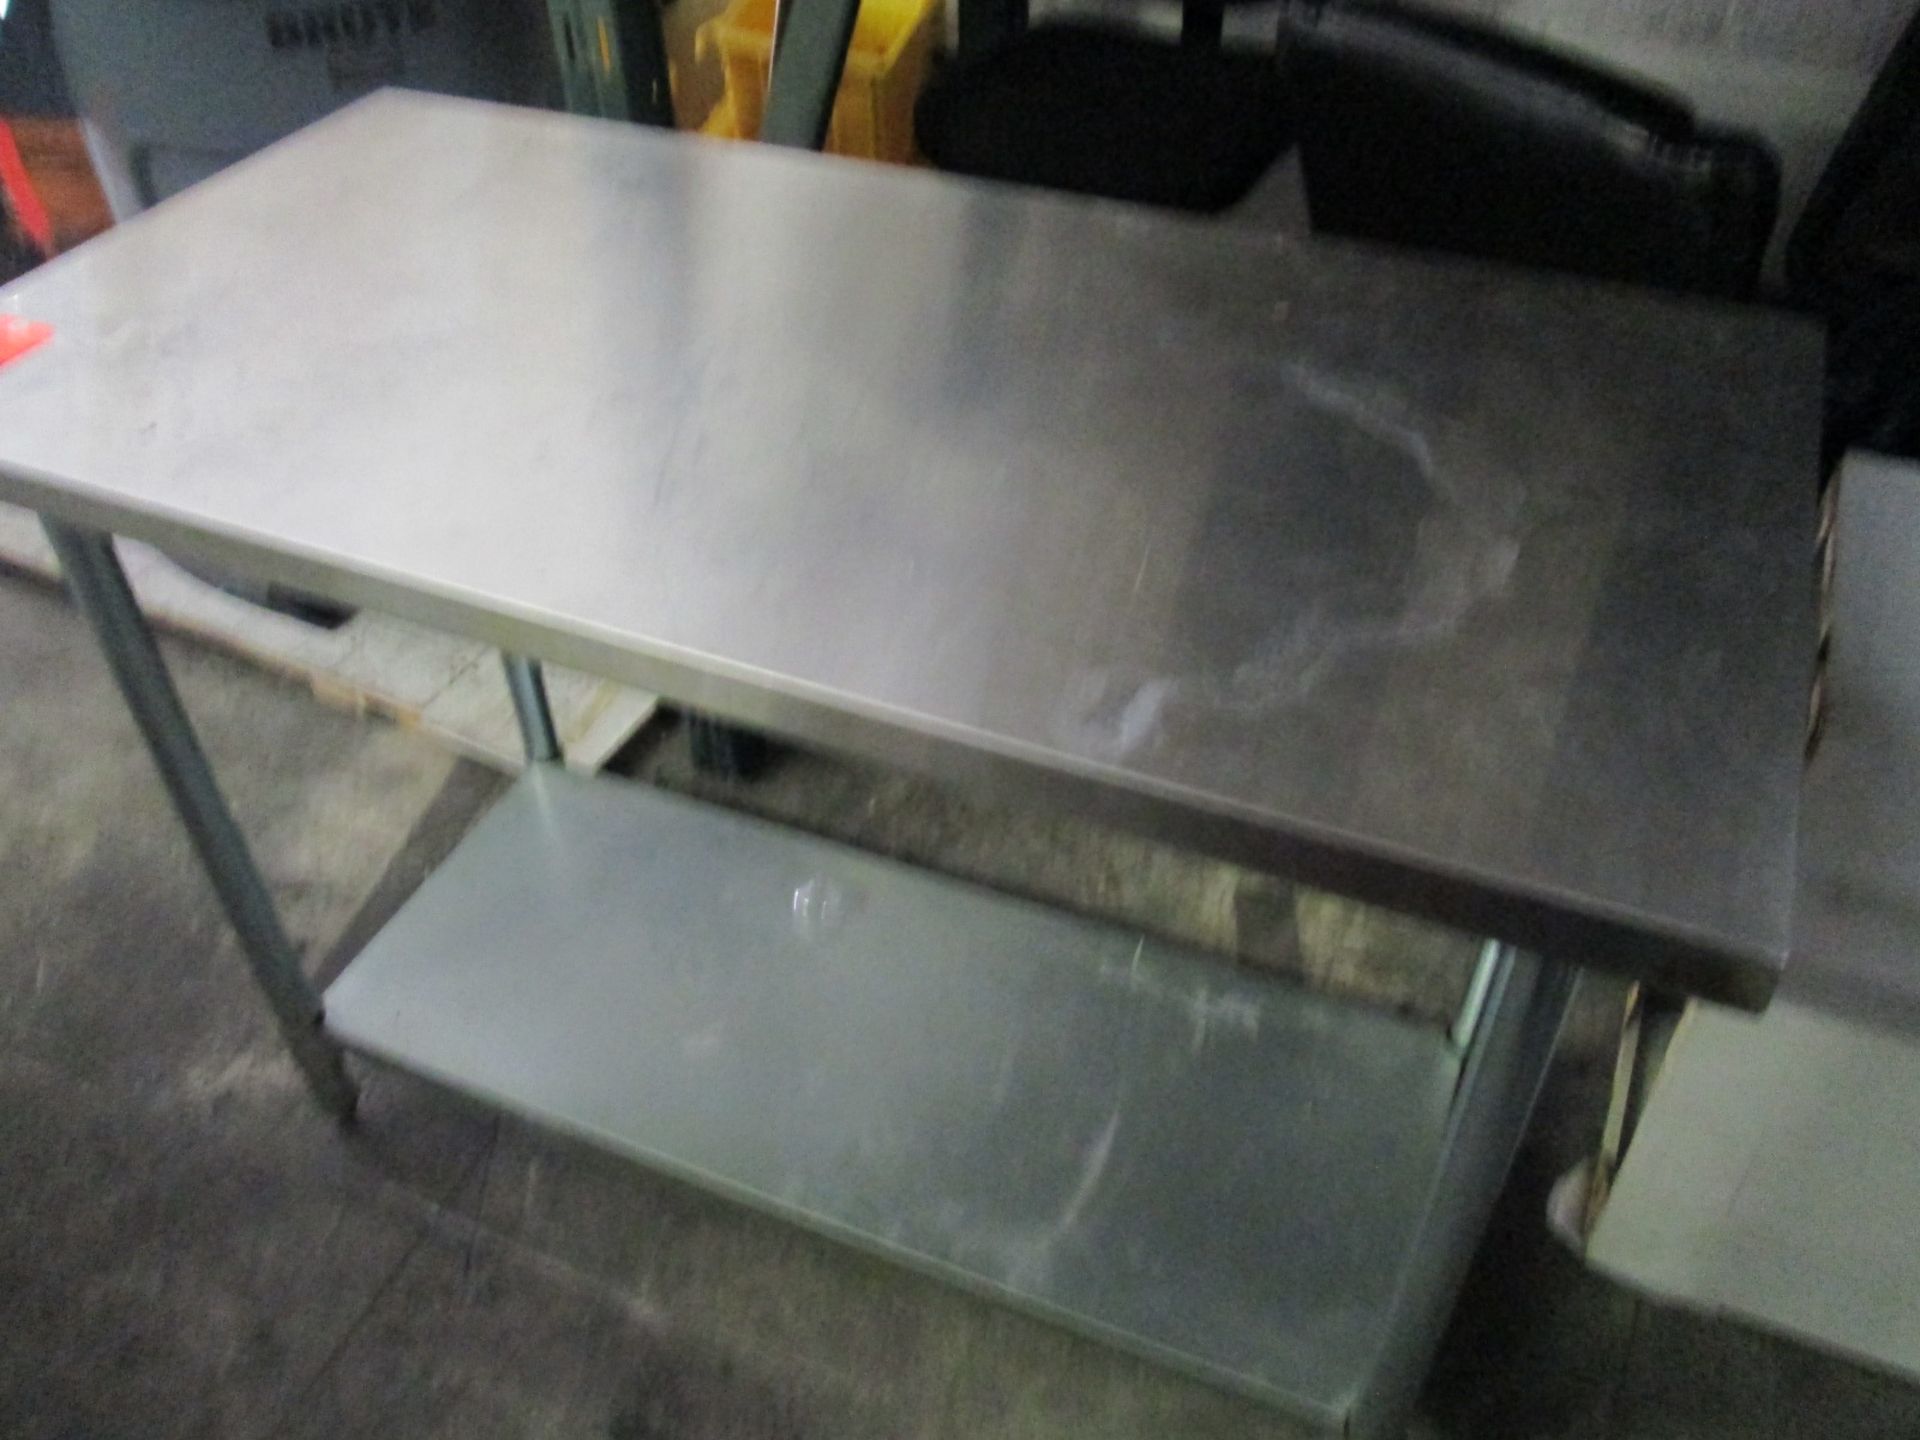 Stainless Steel Table, 24" x 48" x 34" high, 2 Tiers, Mfg by Aero Mfg Model AI-2448 - Image 2 of 3